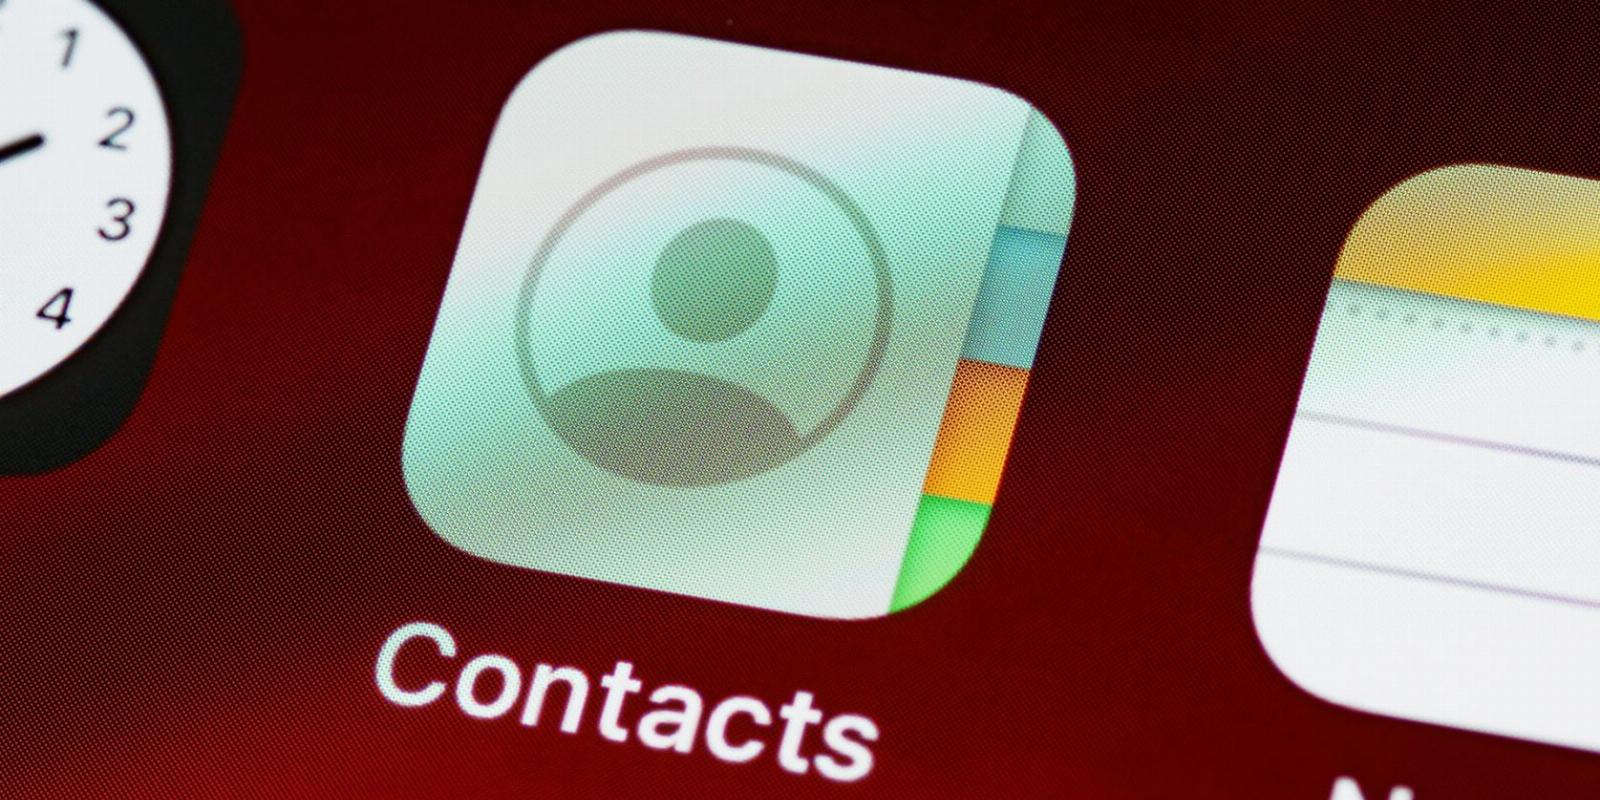 How to Import and Export Your Contacts on a Mac